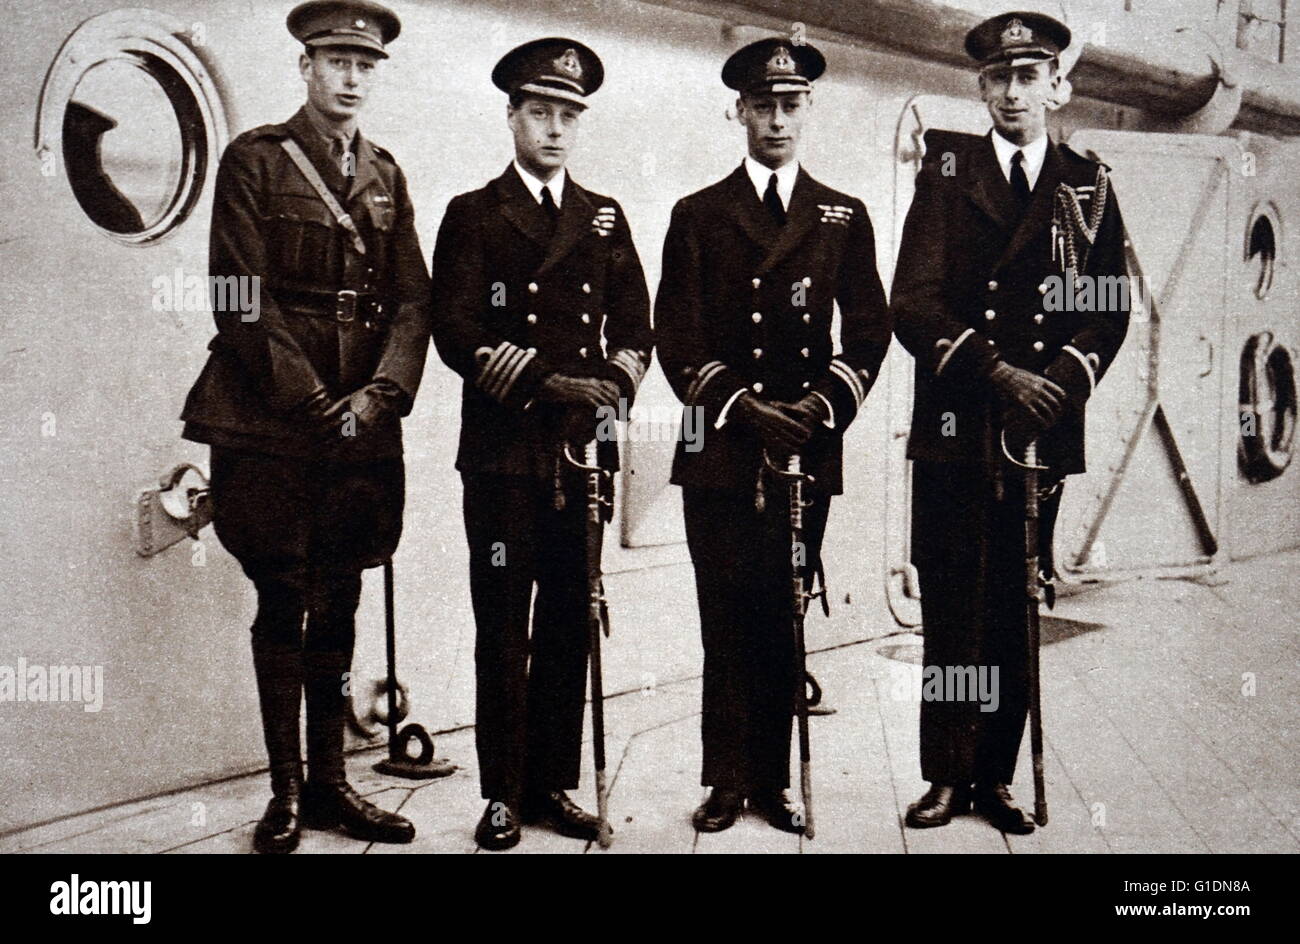 Photograph of Edward, Prince of Wales (1894-1972) leaving to visit Australasia. Also pictured is Prince Albert Frederick Arthur George (1895-1952) and Prince Henry, Duke of Gloucester (1900-1974) to bid him farewell. Dated 20th Century Stock Photo